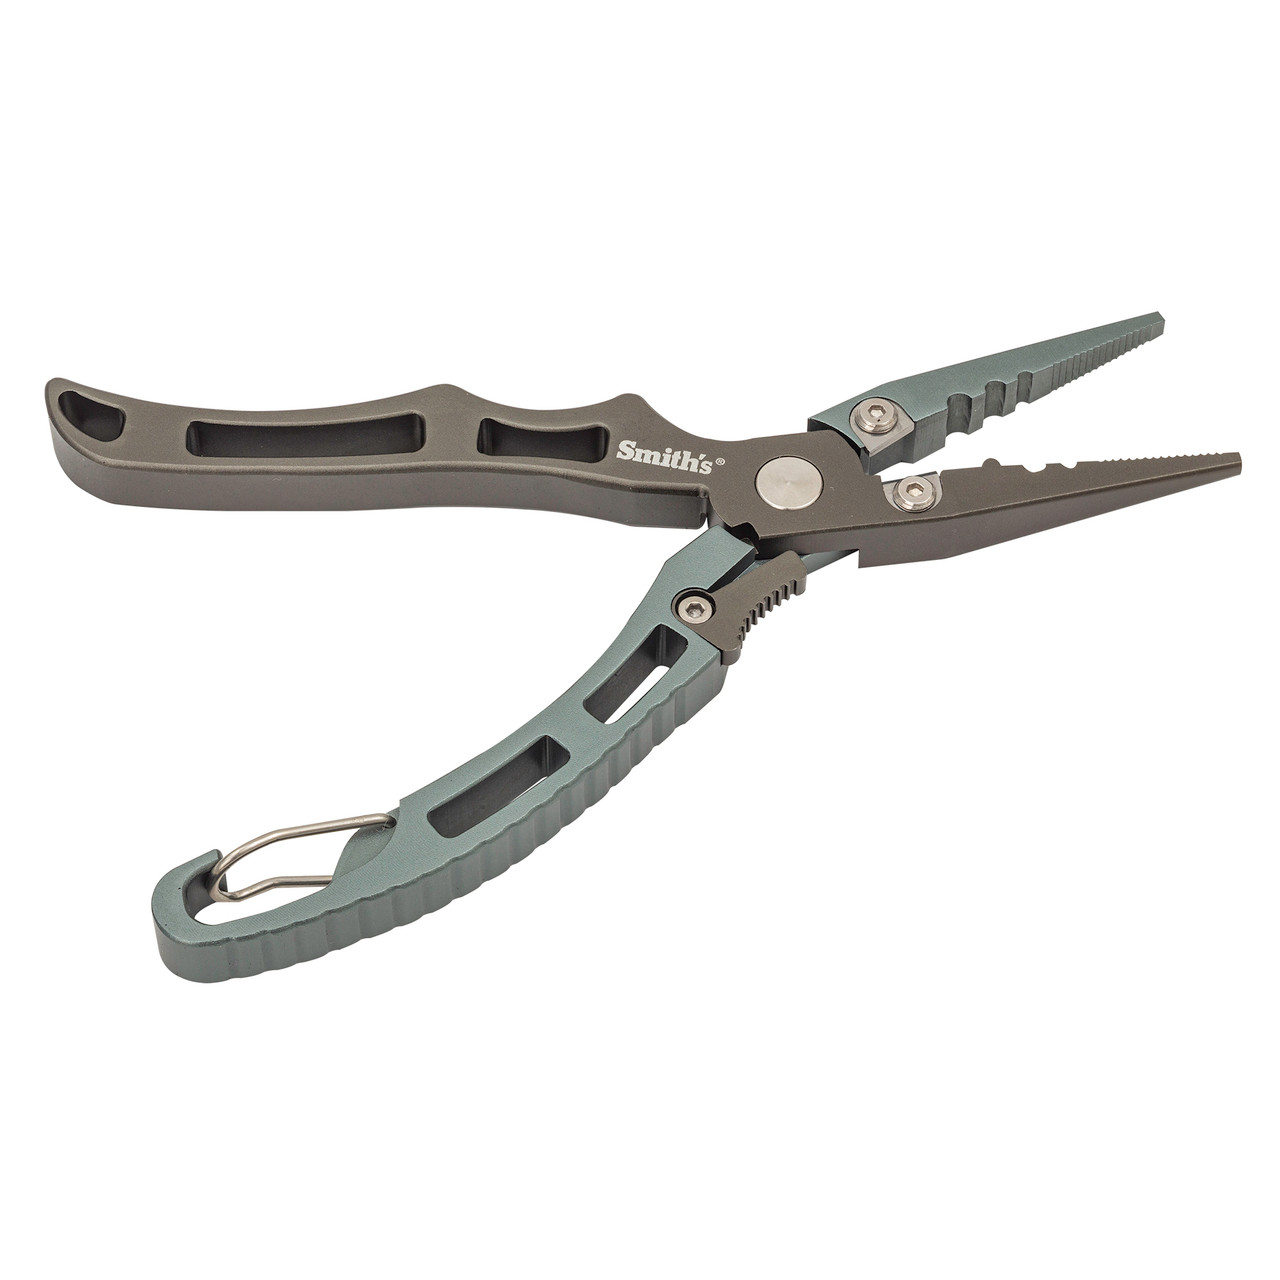 Locking Aluminum Fishing Pliers - Smith's Consumer Products